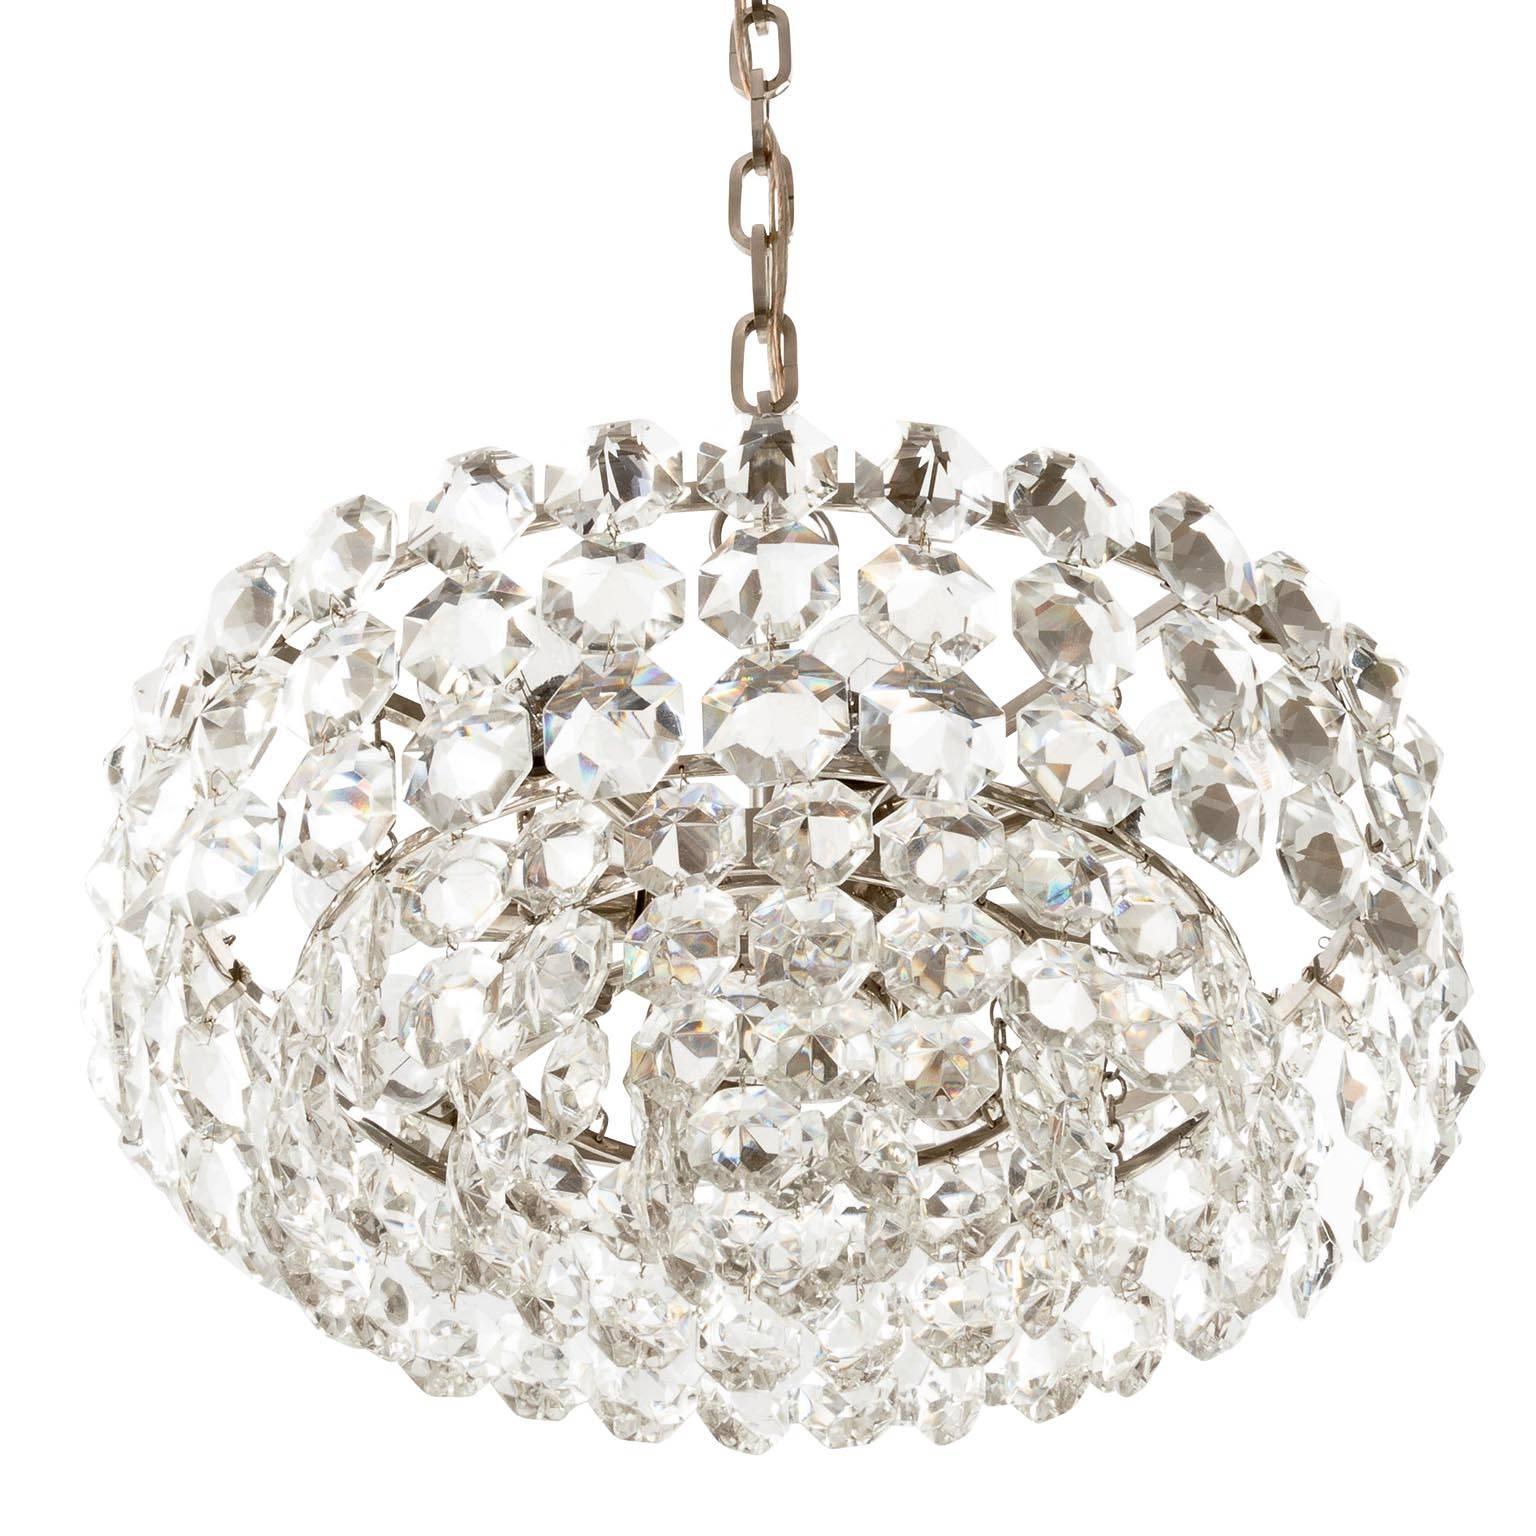 One of Two Bakalowits Chandeliers Pendant Lights, Nickel Glass, 1960s For Sale 1